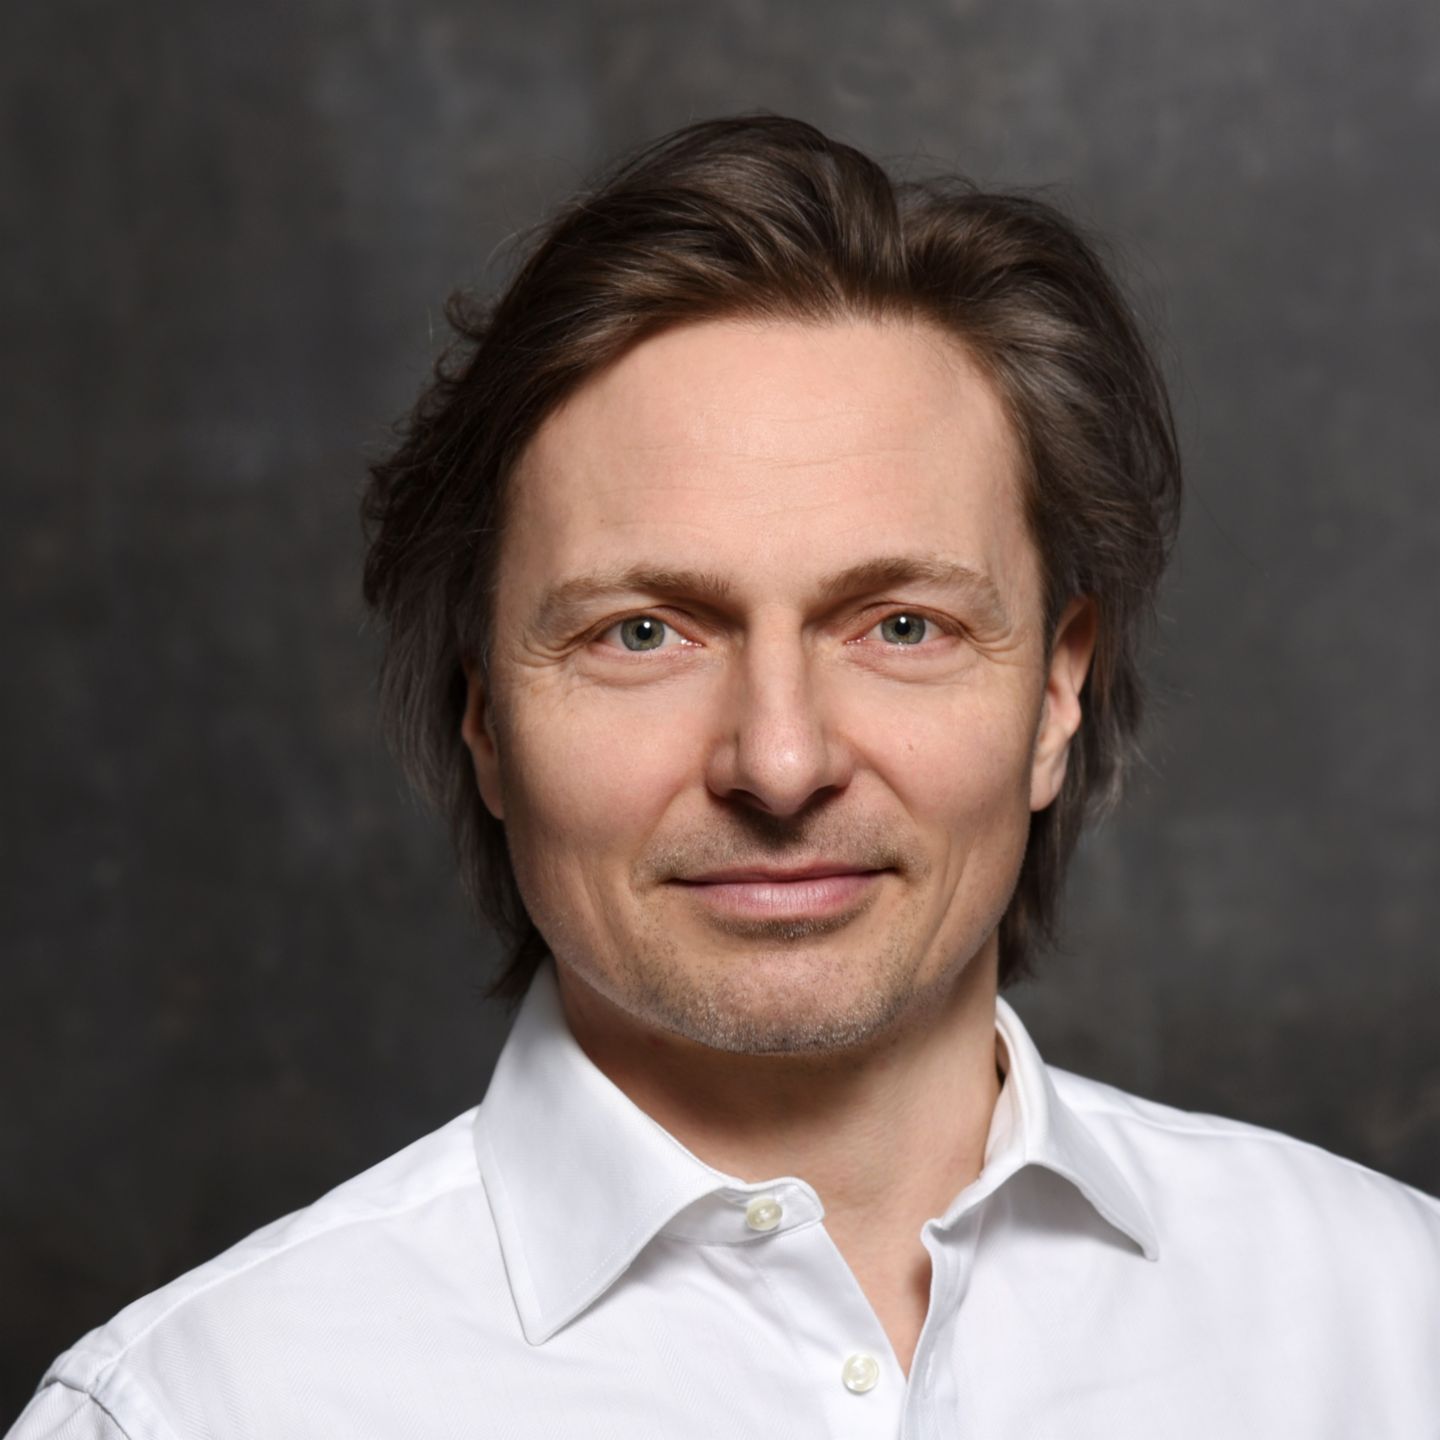 Cybersecurity expert Janusch Skubatz, Chief Information Security Officer of the EOS Group, with brown hair and white shirt